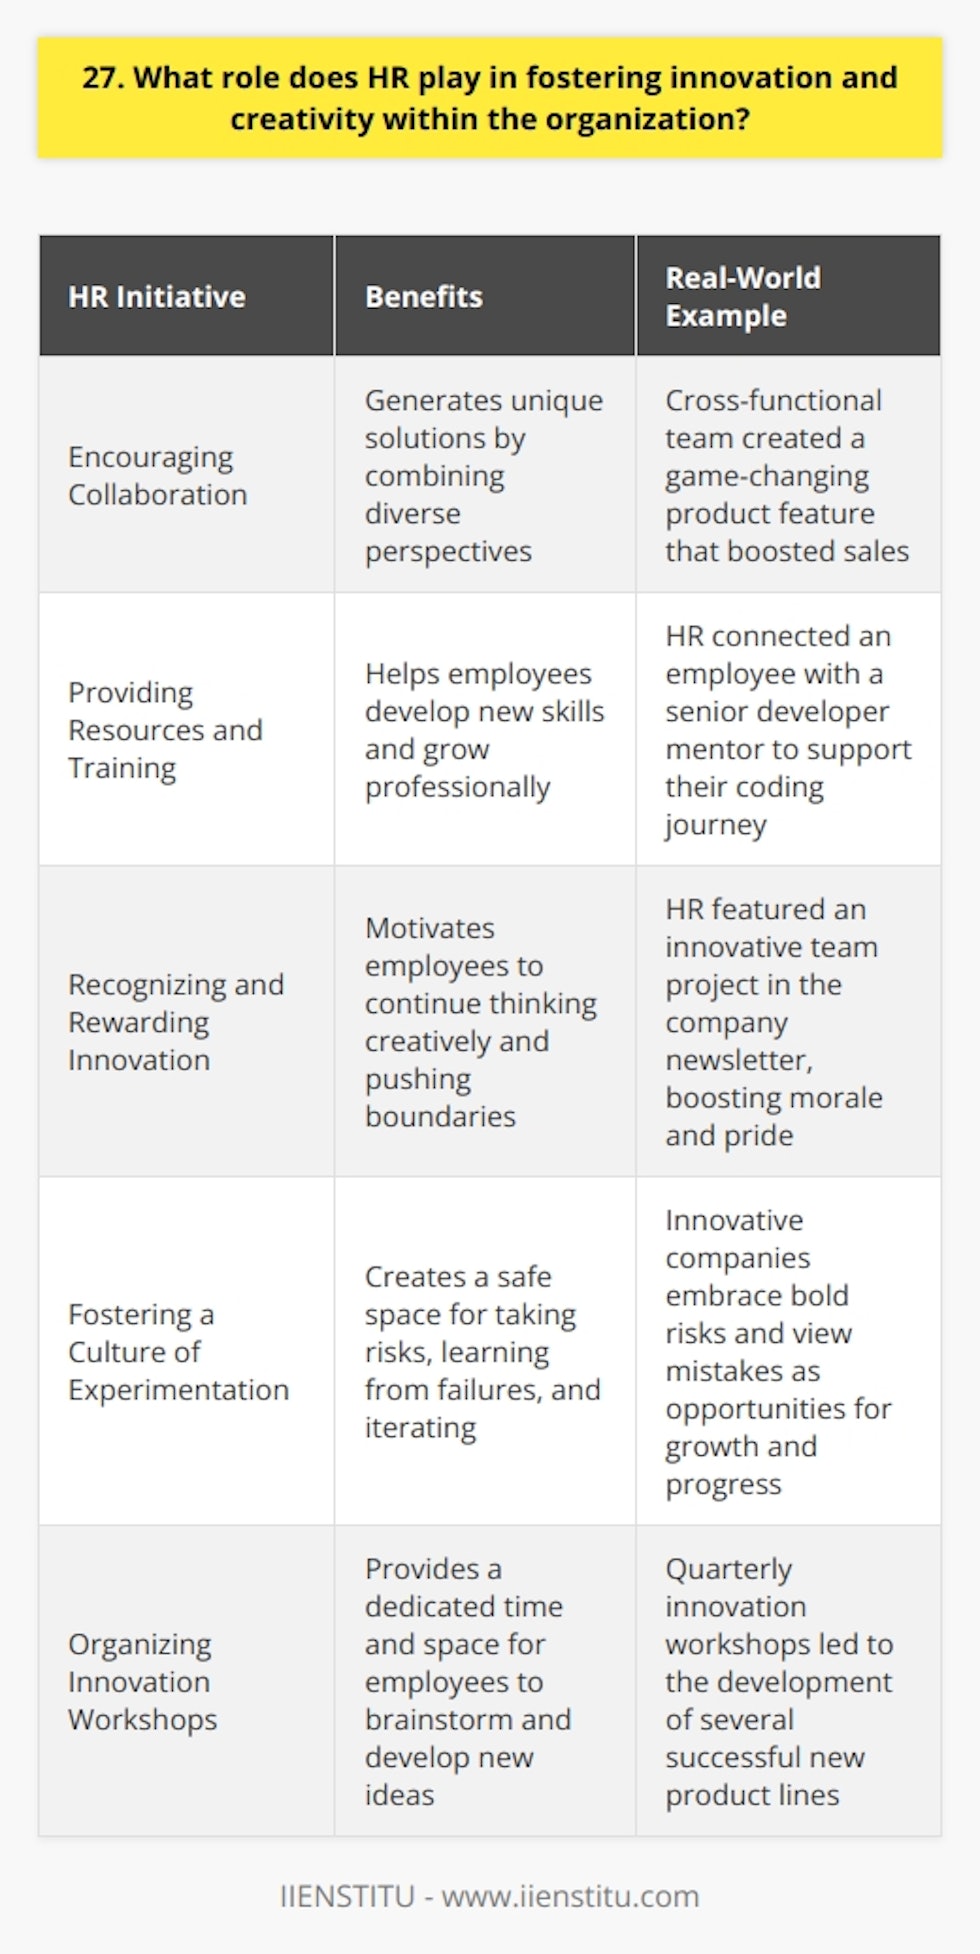 HR plays a crucial role in fostering innovation and creativity within an organization. They are responsible for creating a work environment that encourages employees to think outside the box and come up with new ideas. Encouraging Collaboration HR can promote collaboration by organizing cross-functional teams and facilitating communication between departments. When employees from different backgrounds and skill sets work together, they can generate unique solutions to problems. I once worked on a project where HR brought together people from marketing, engineering, and customer service. By combining our diverse perspectives, we came up with a game-changing product feature that boosted sales. Providing Resources and Training HR can support innovation by providing employees with the resources and training they need to develop new skills. This could include access to online courses, workshops, or mentorship programs. When I was learning to code, my companys HR department connected me with a senior developer who became my mentor. His guidance and support were invaluable in helping me grow as a programmer. Recognizing and Rewarding Innovation HR can encourage employees to be innovative by recognizing and rewarding their efforts. This could include bonuses, promotions, or public acknowledgement of their achievements. I remember feeling incredibly proud when HR featured my teams project in the company newsletter. It motivated us to keep pushing ourselves and thinking creatively. Fostering a Culture of Experimentation Finally, HR can foster a culture of experimentation by creating a safe space for employees to take risks and try new things. This means embracing failure as a learning opportunity and encouraging employees to keep iterating and improving. In my experience, the most innovative companies are the ones that arent afraid to fail. They understand that progress often requires taking bold risks and learning from mistakes along the way.